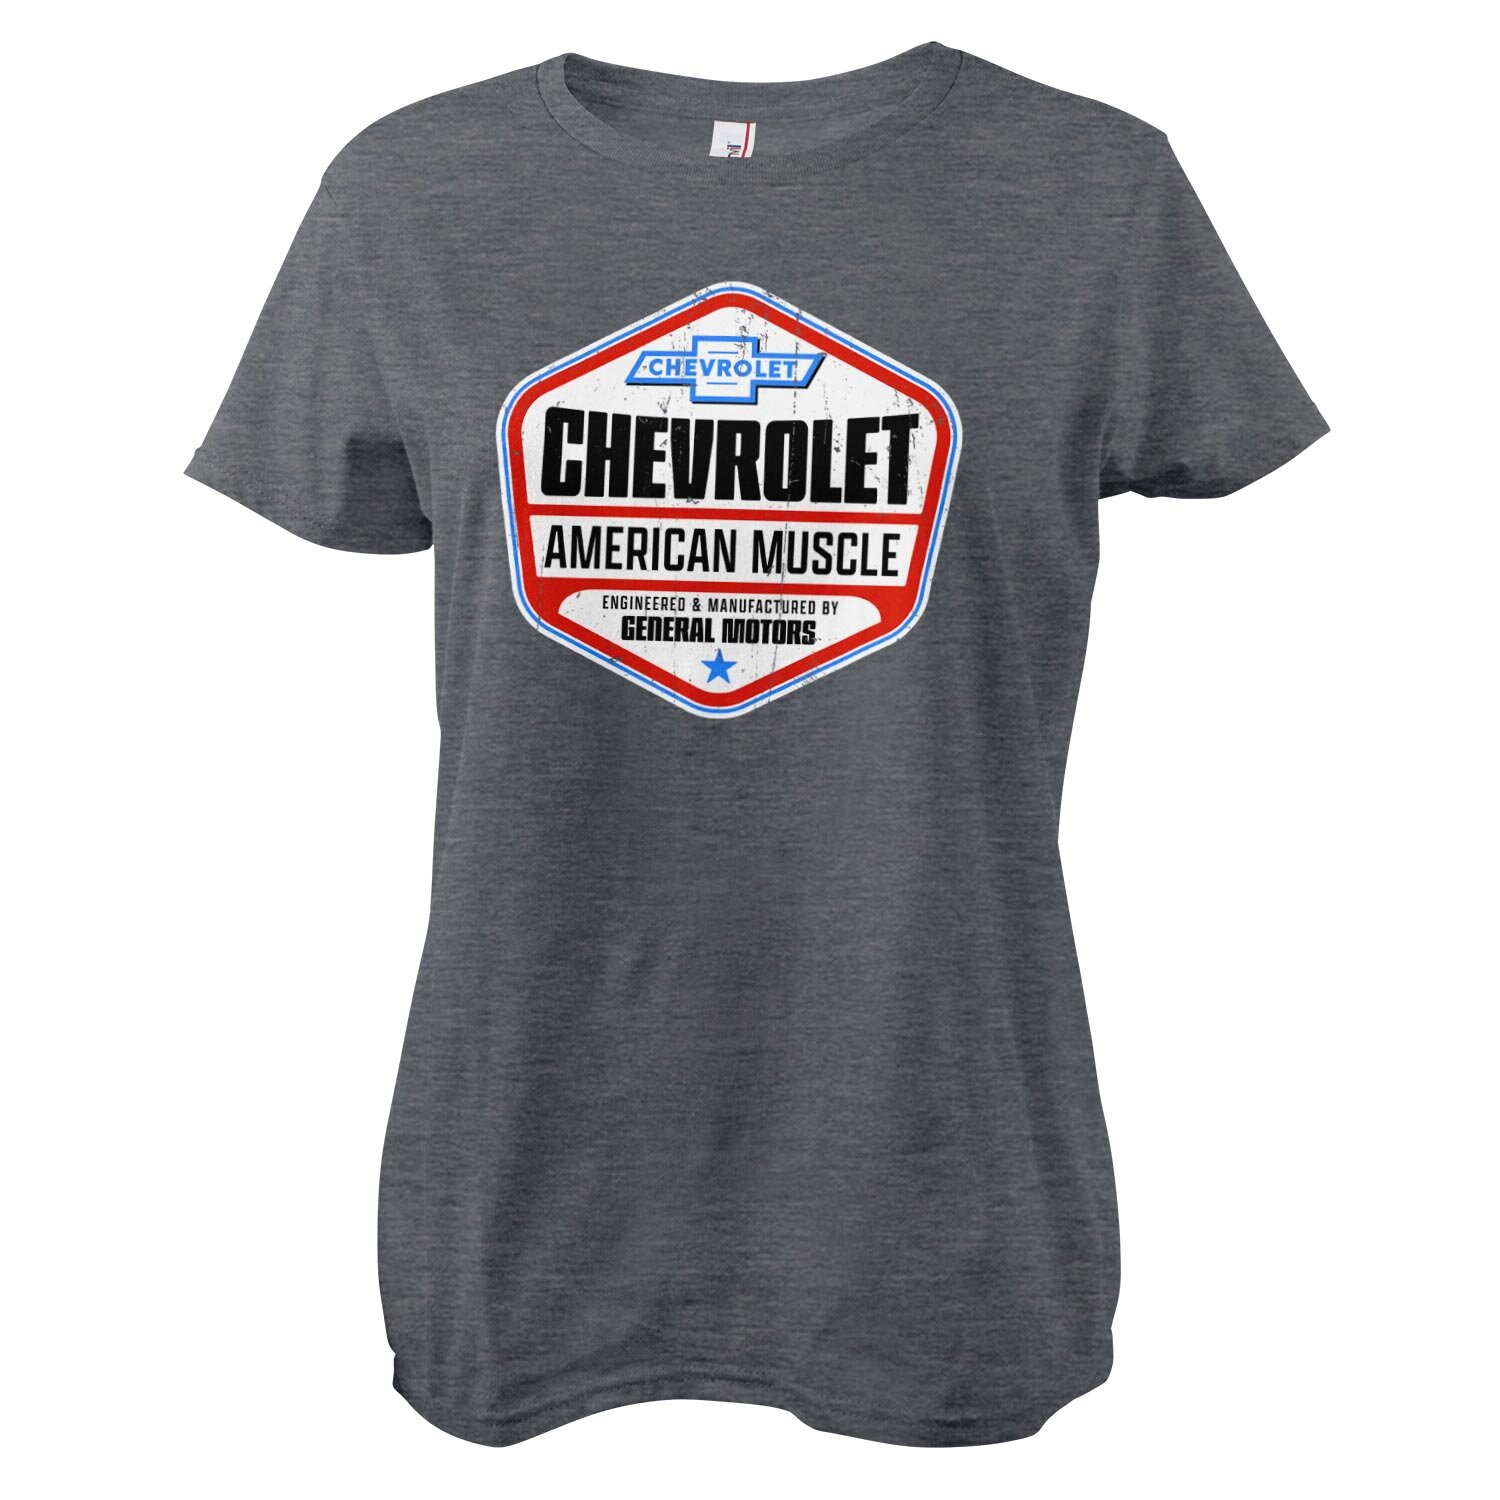 Chevrolet - American Muscle Girly Tee